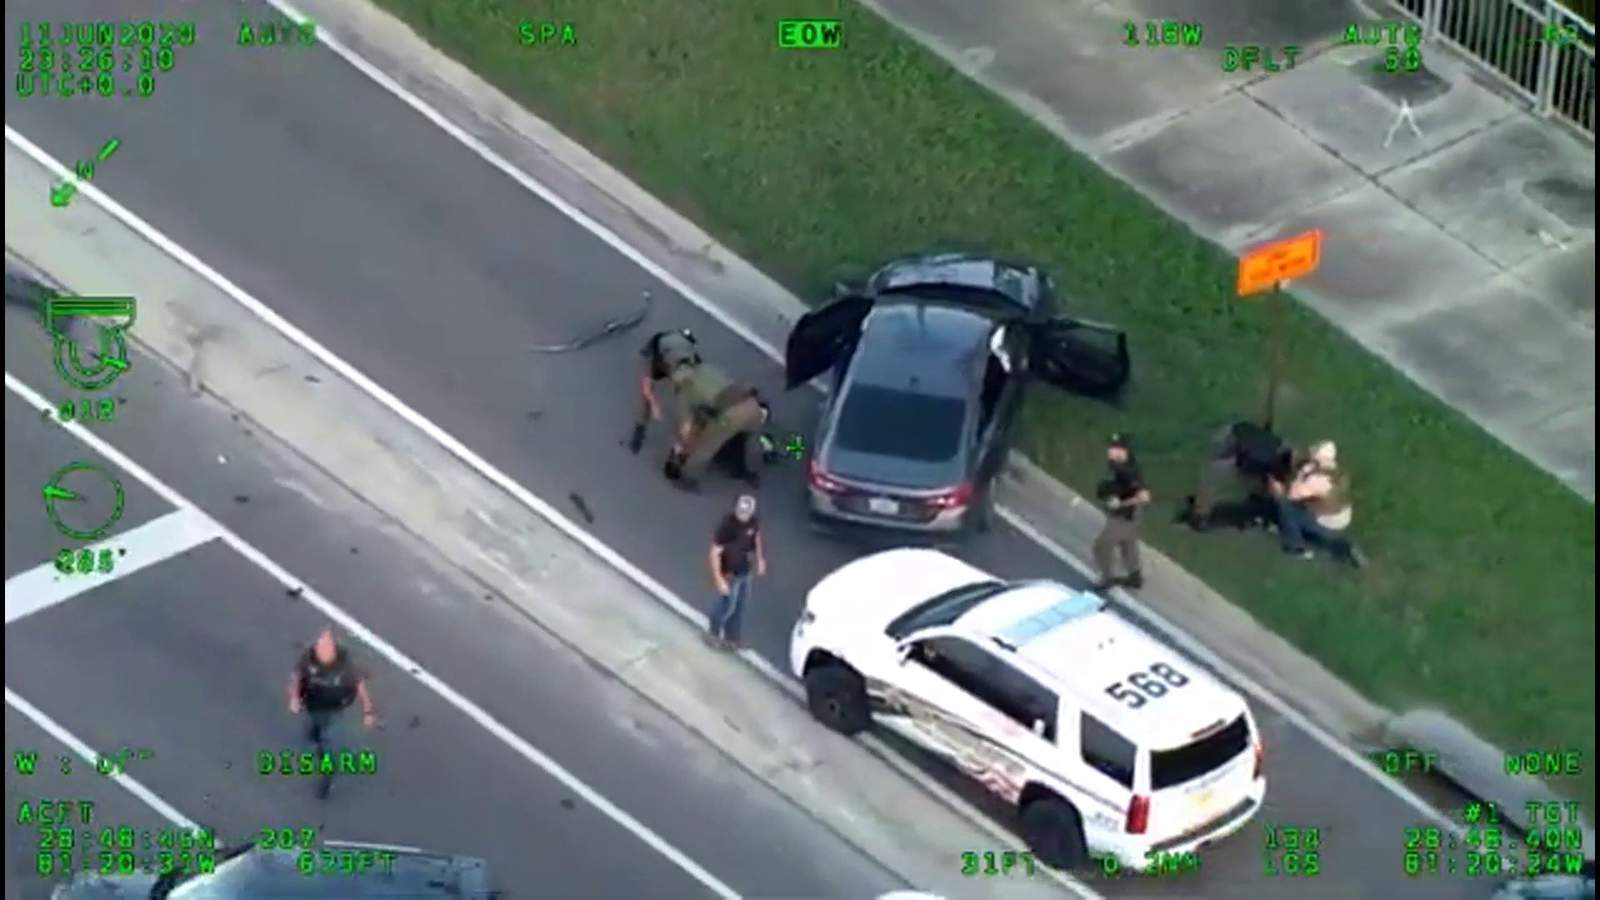 Video: Shooting suspects arrested after crashing into detectives vehicle, deputies say